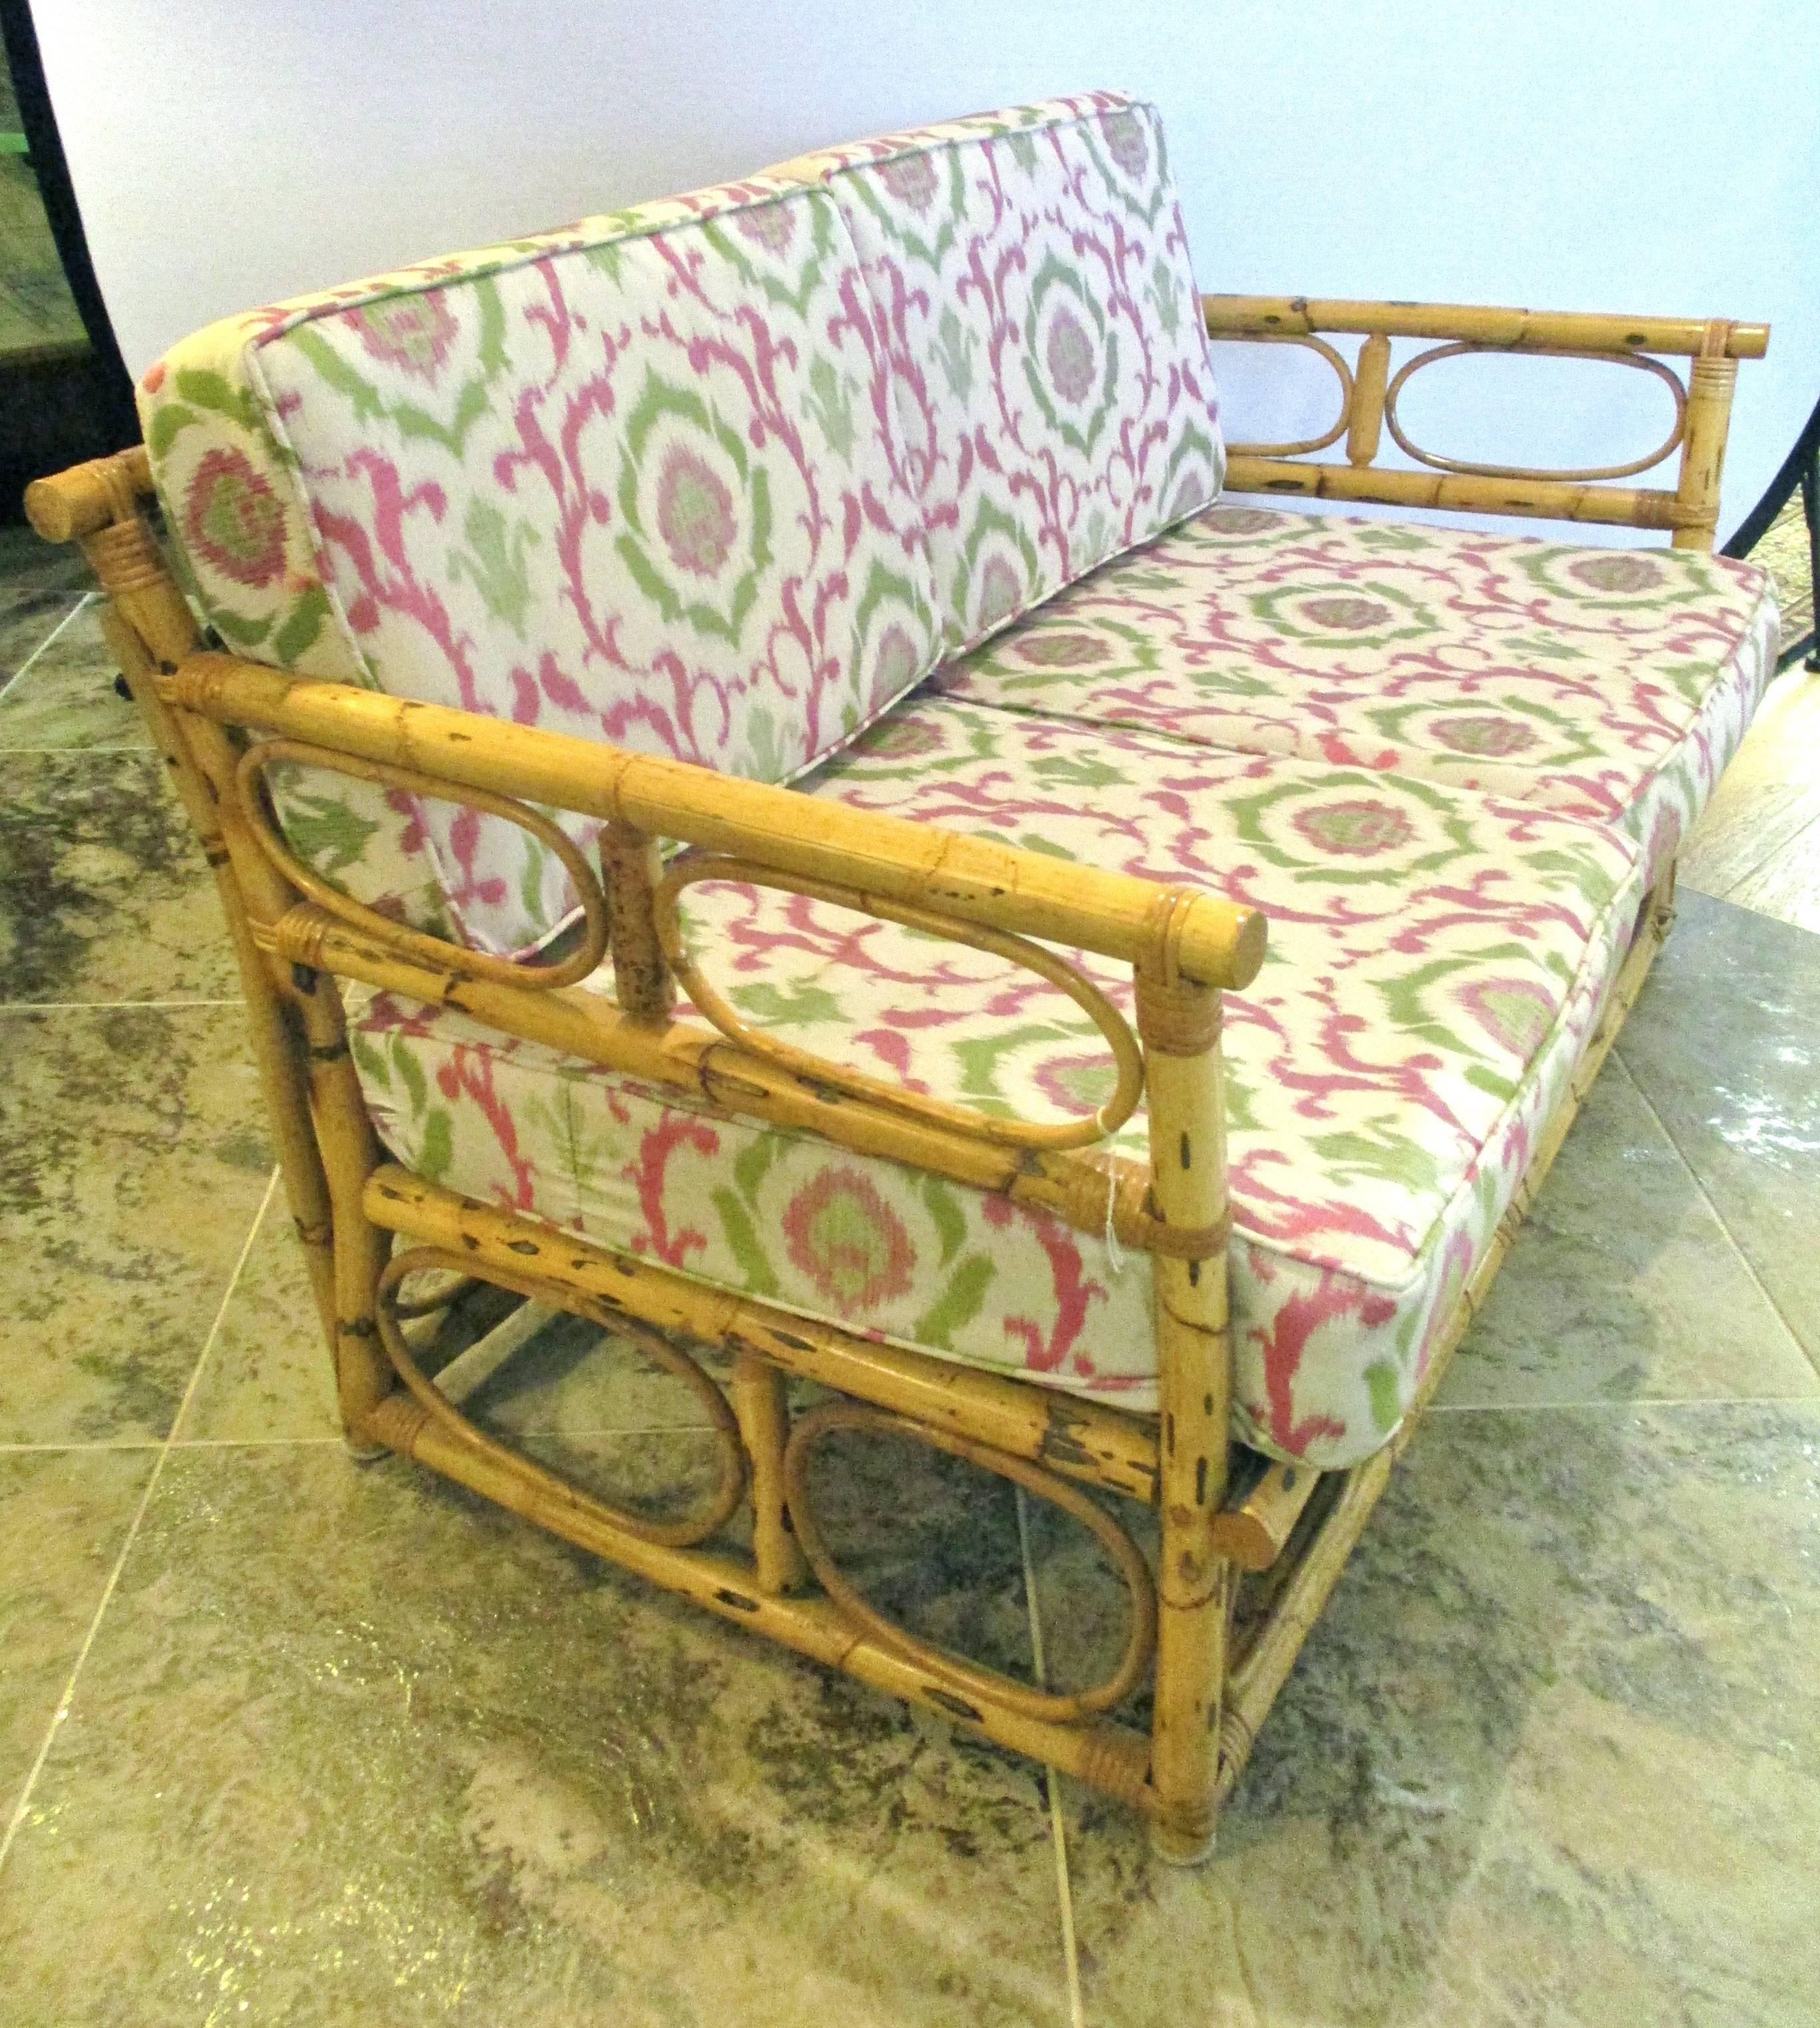 Vintage bamboo settee or settee is crafted of real bamboo and has newly upholstered cushions.